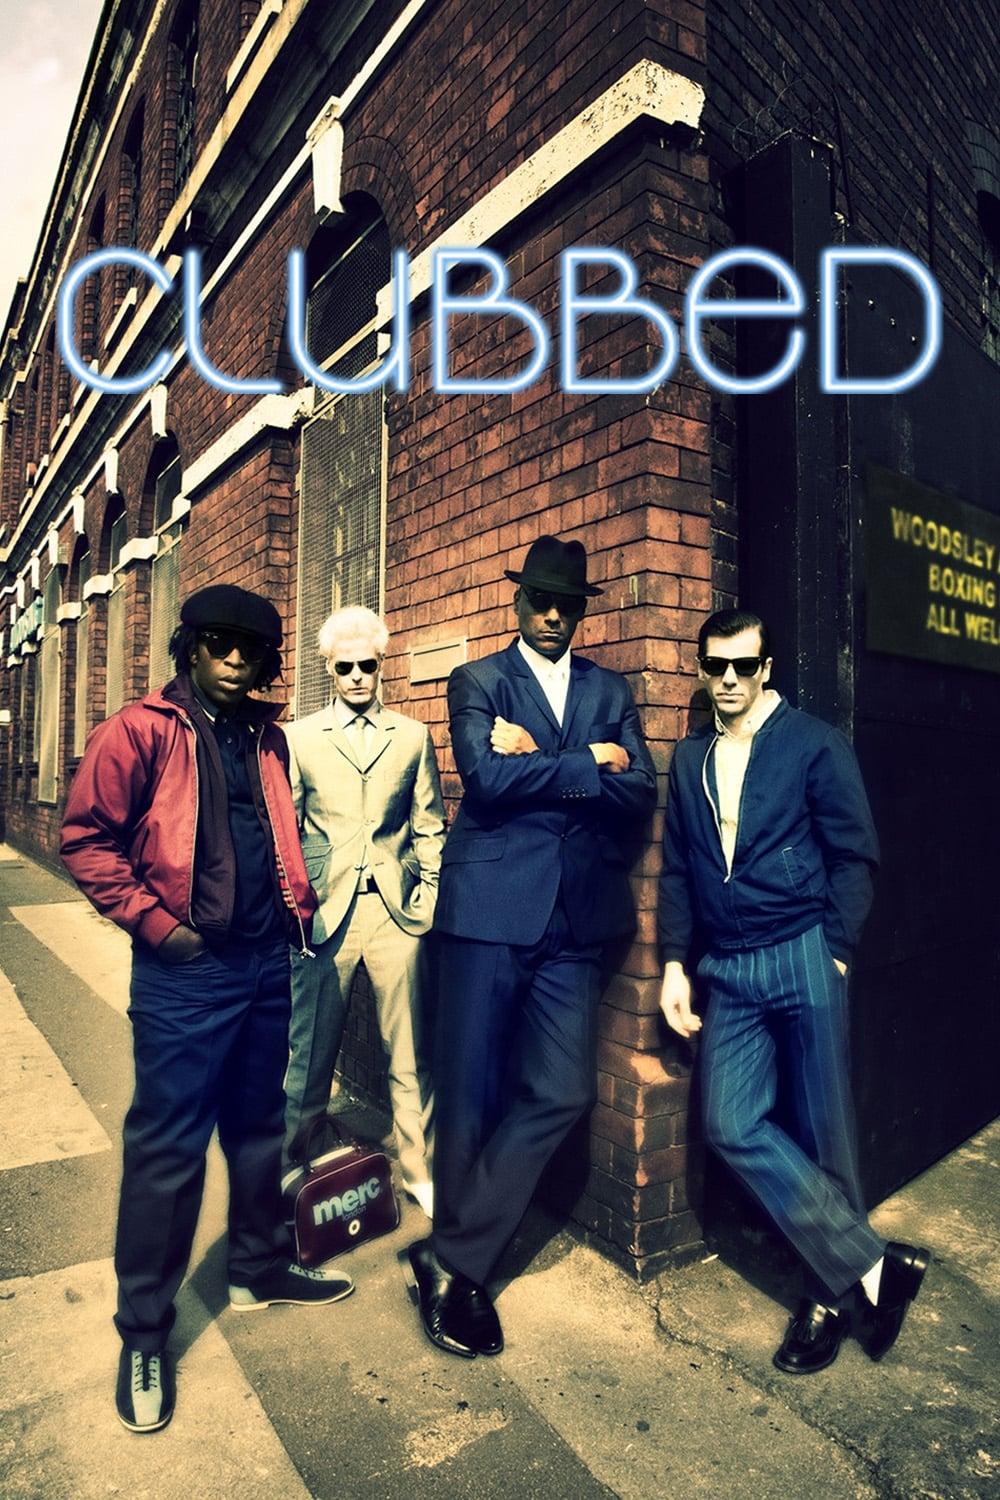 Clubbed poster